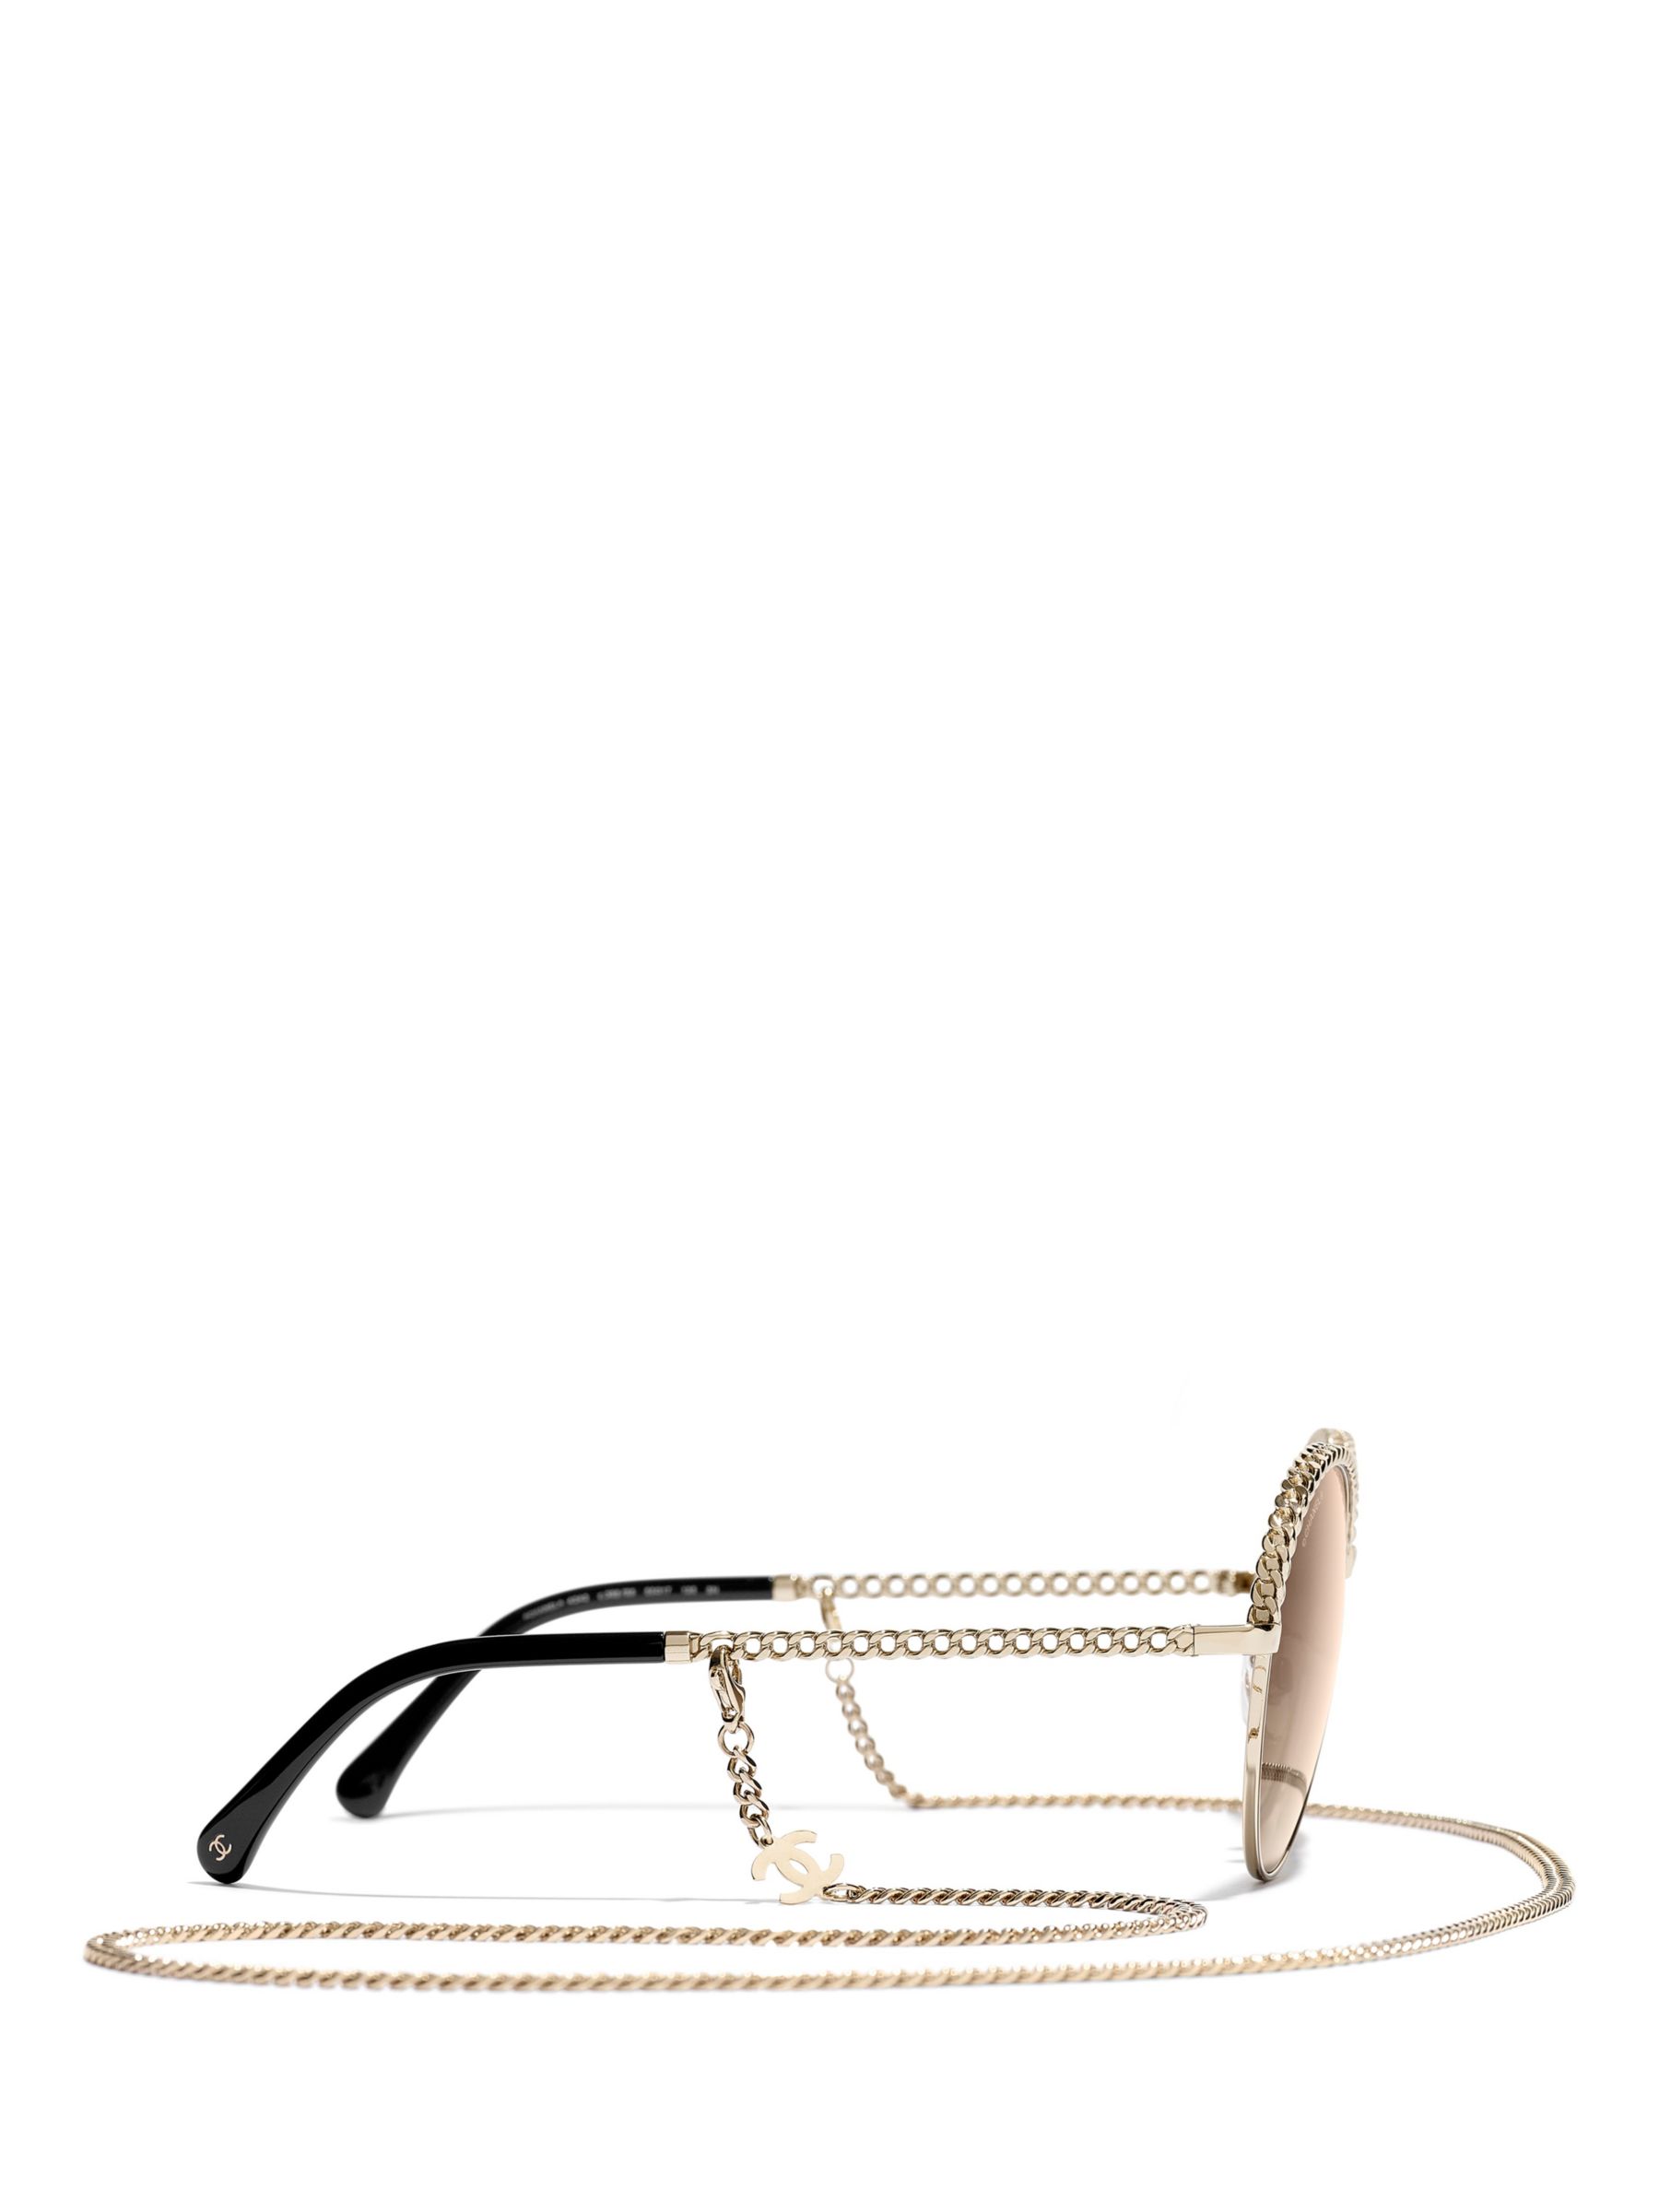 CHANEL Oval Sunglasses CH4242 Pale Gold/Brown Gradient at John Lewis ...